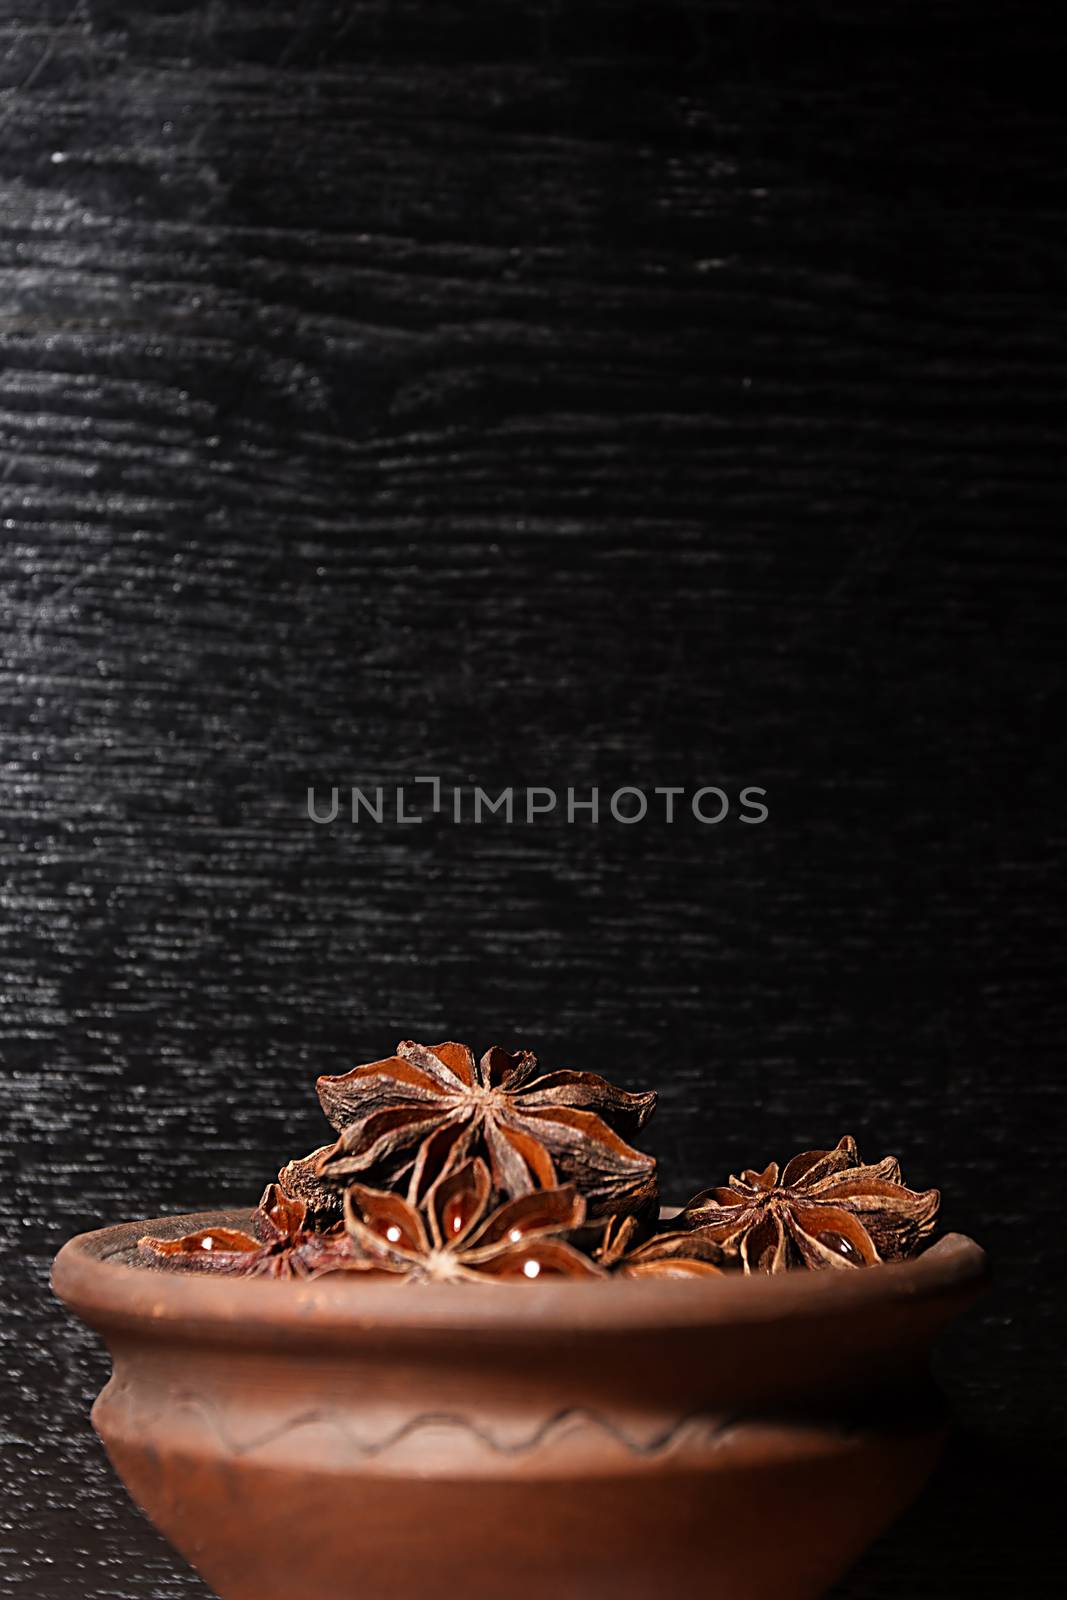 Anis in bowl, dark background, selective focus